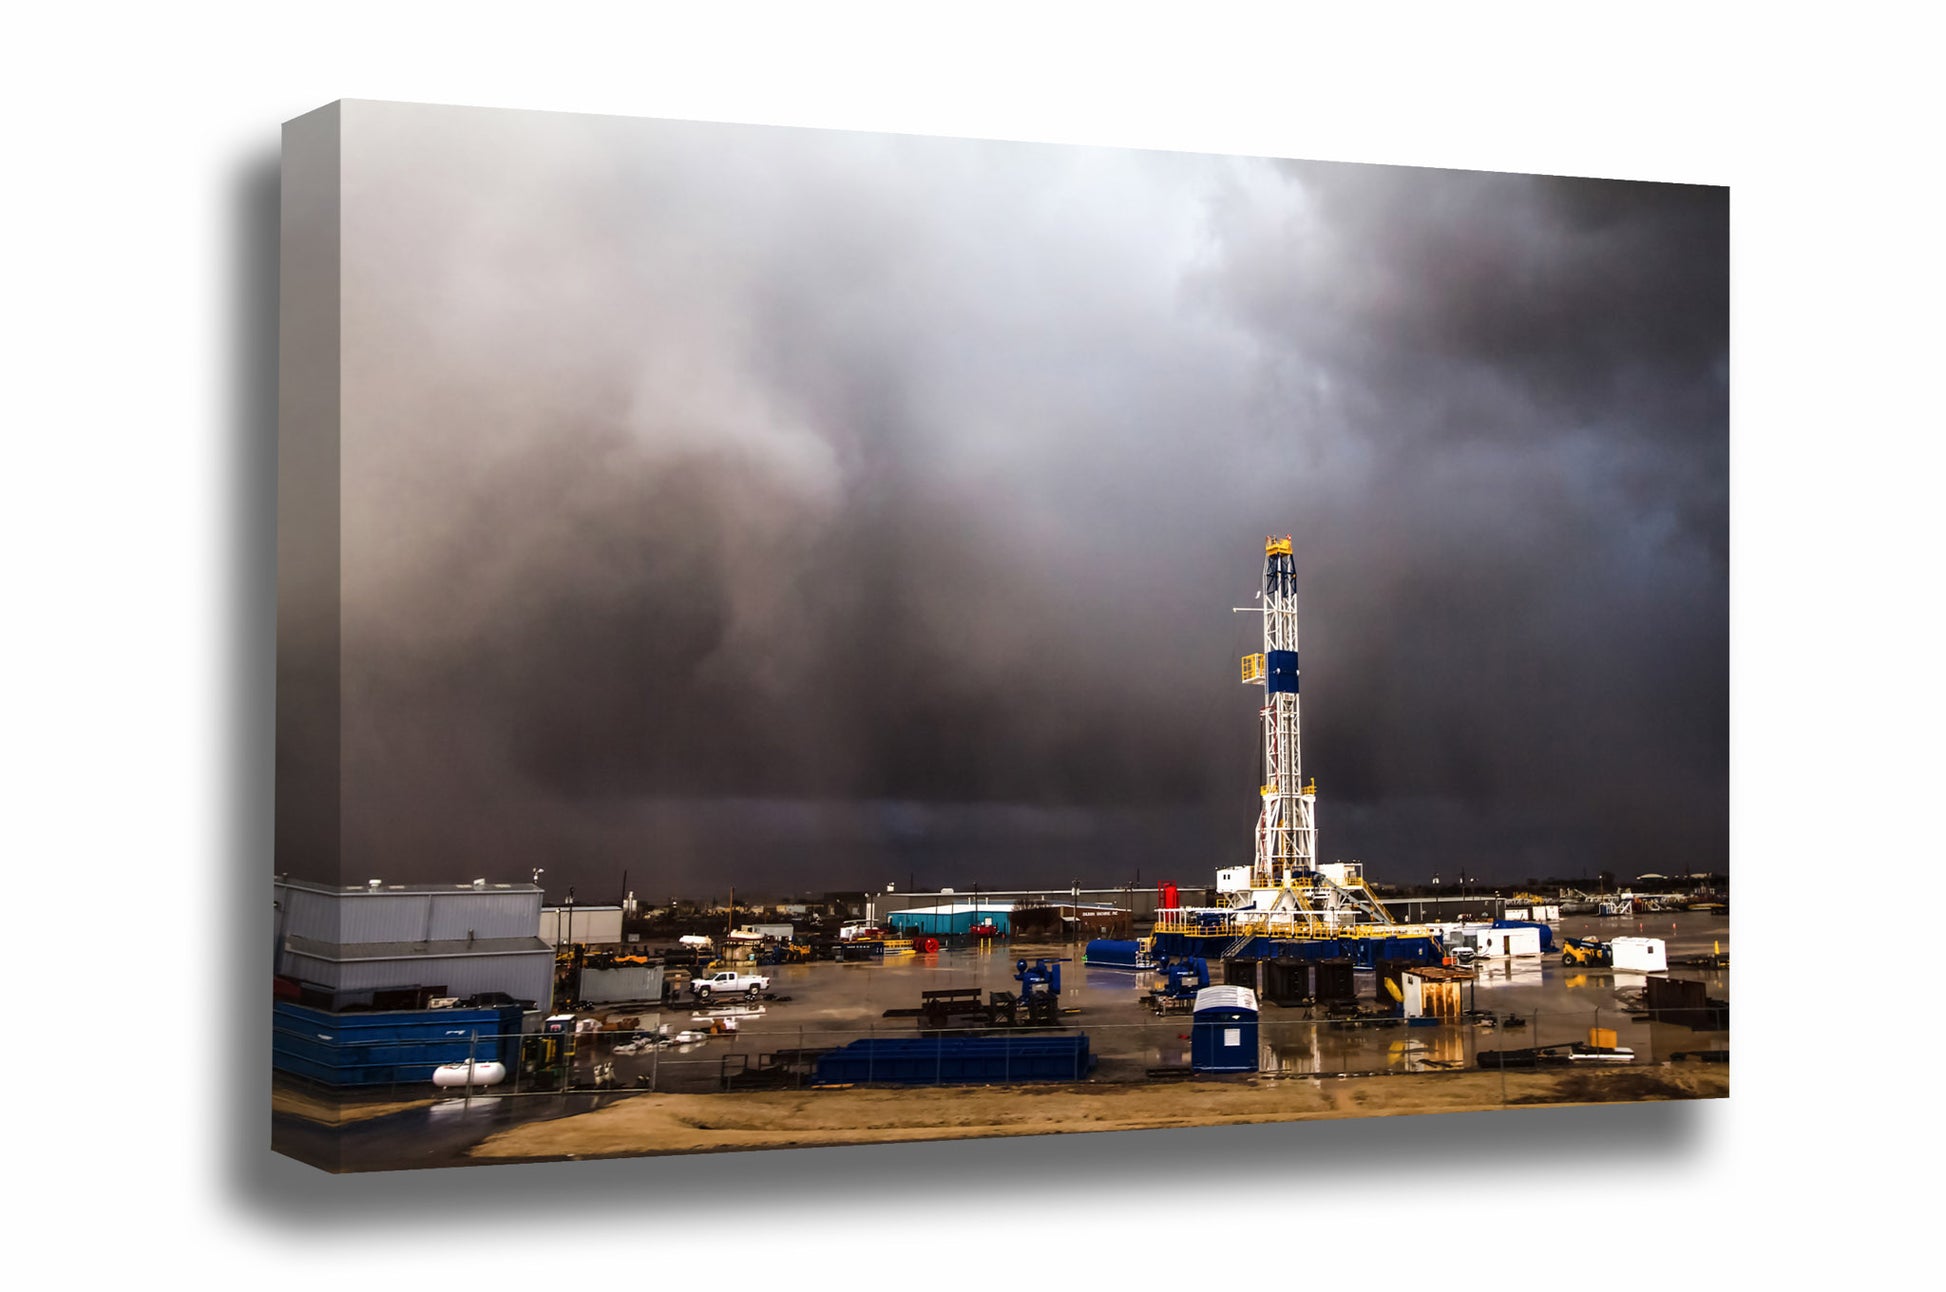 Oilfield canvas wall art of an intense storm passing by a drilling rig on a stormy spring day in Oklahoma by Sean Ramsey of Southern Plains Photography.